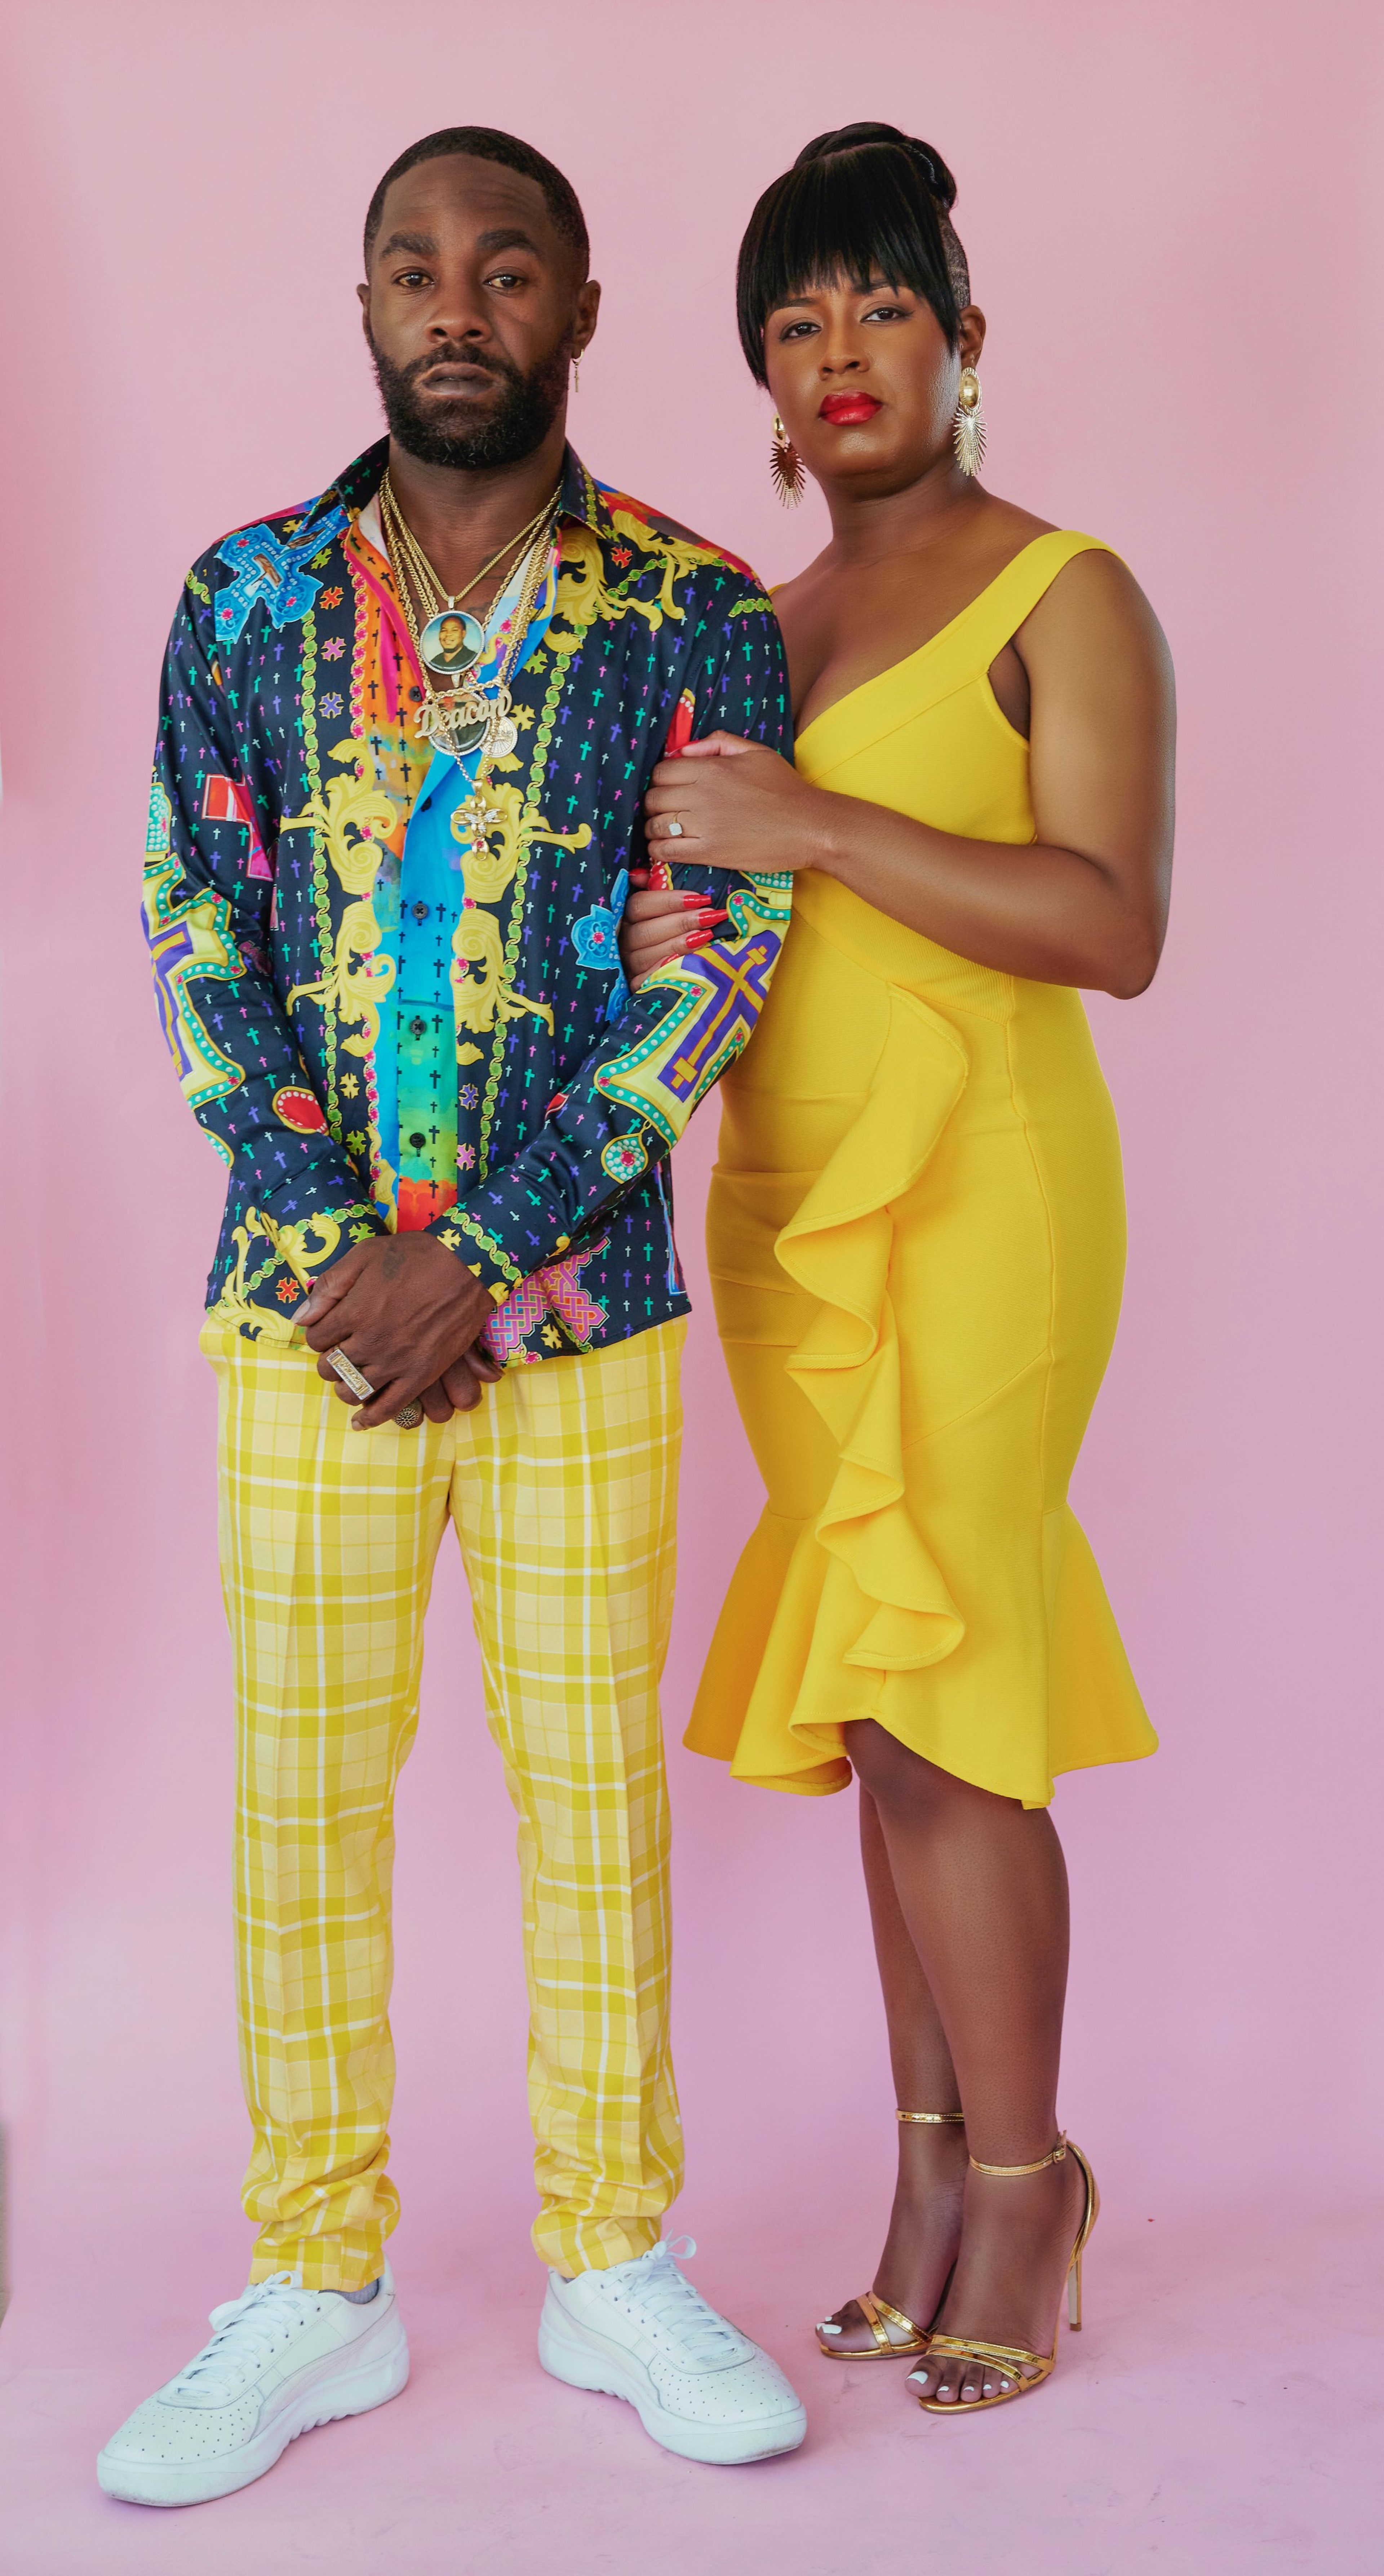 A woman and a man posing together during a photoshoot.